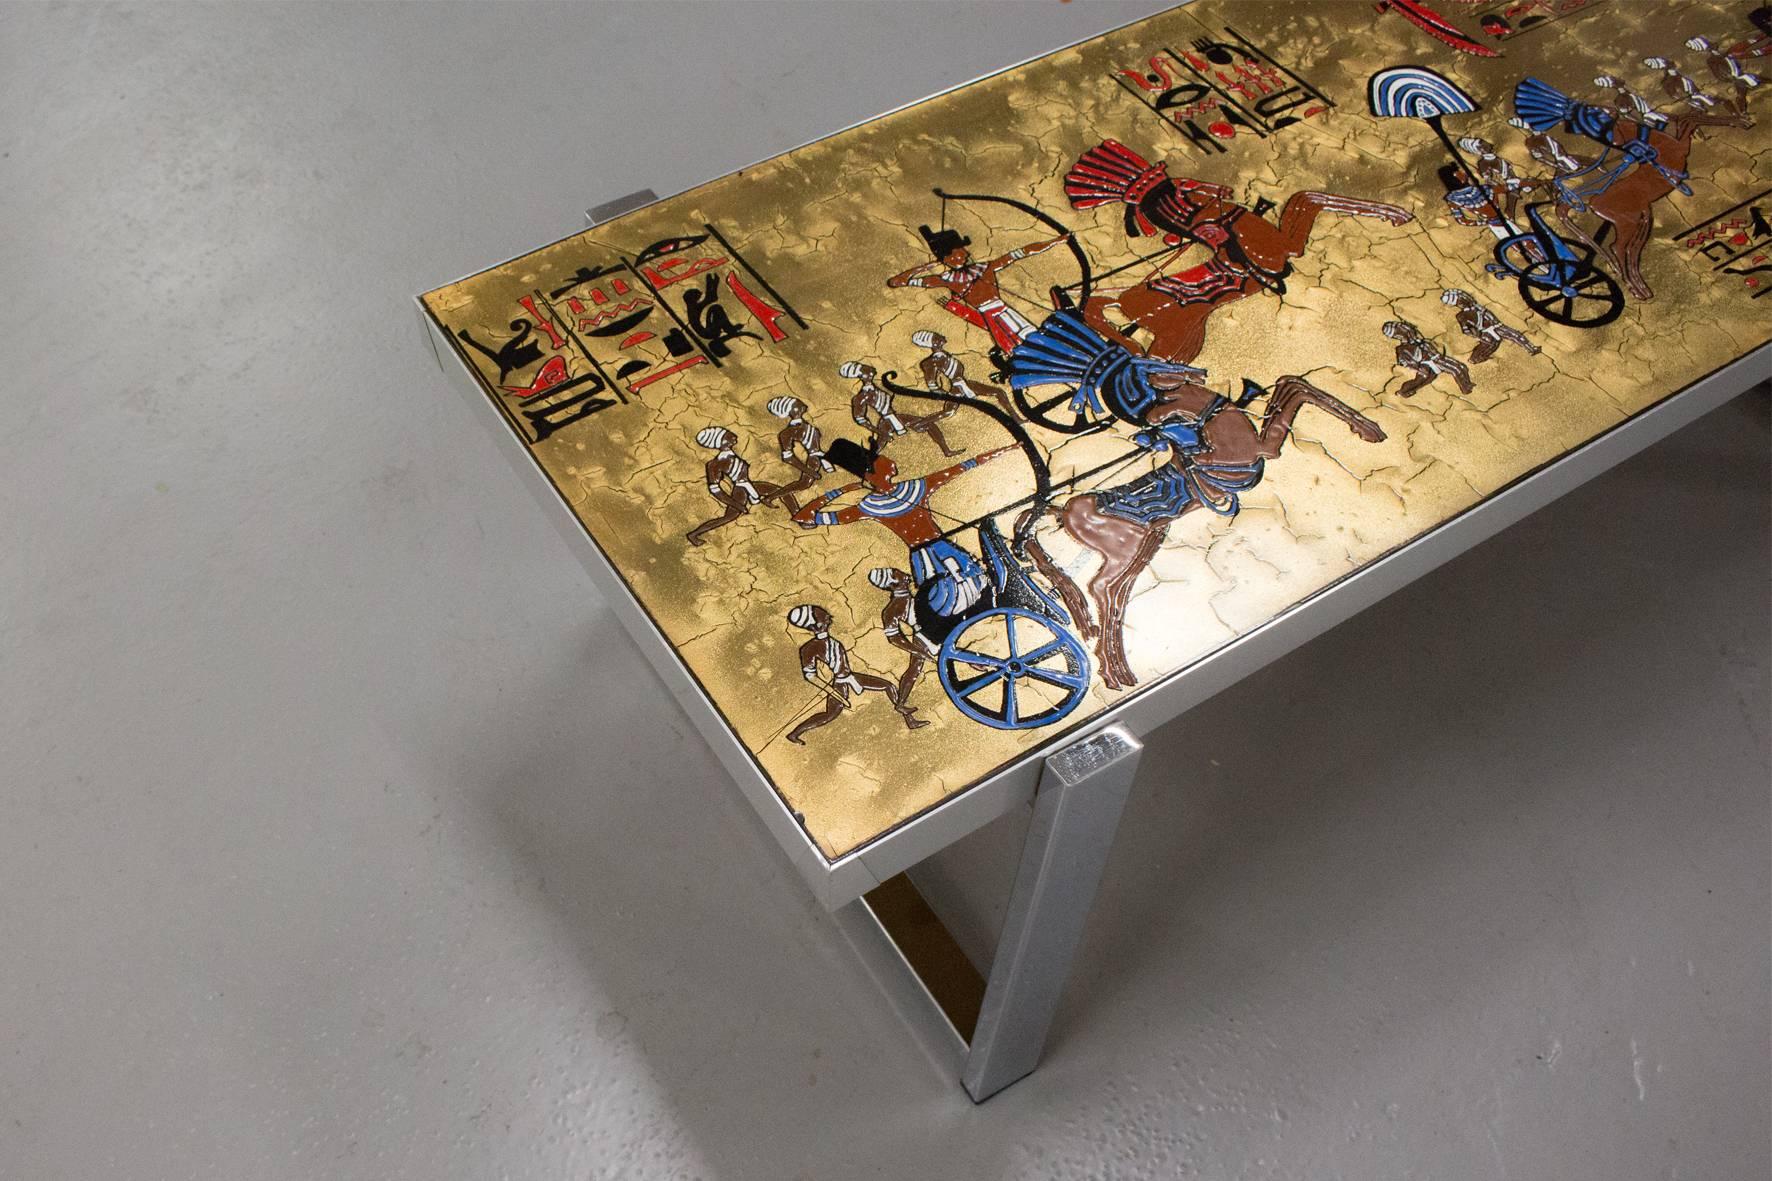 This signed Denisco Egyptian-themed coffee table was originally produced in Belgium in the 1960s or 1970s. The top is made of a golden hand-painted tile with a detailed Egyptian setting.

The sides and legs are made out of a glossy chrome, which